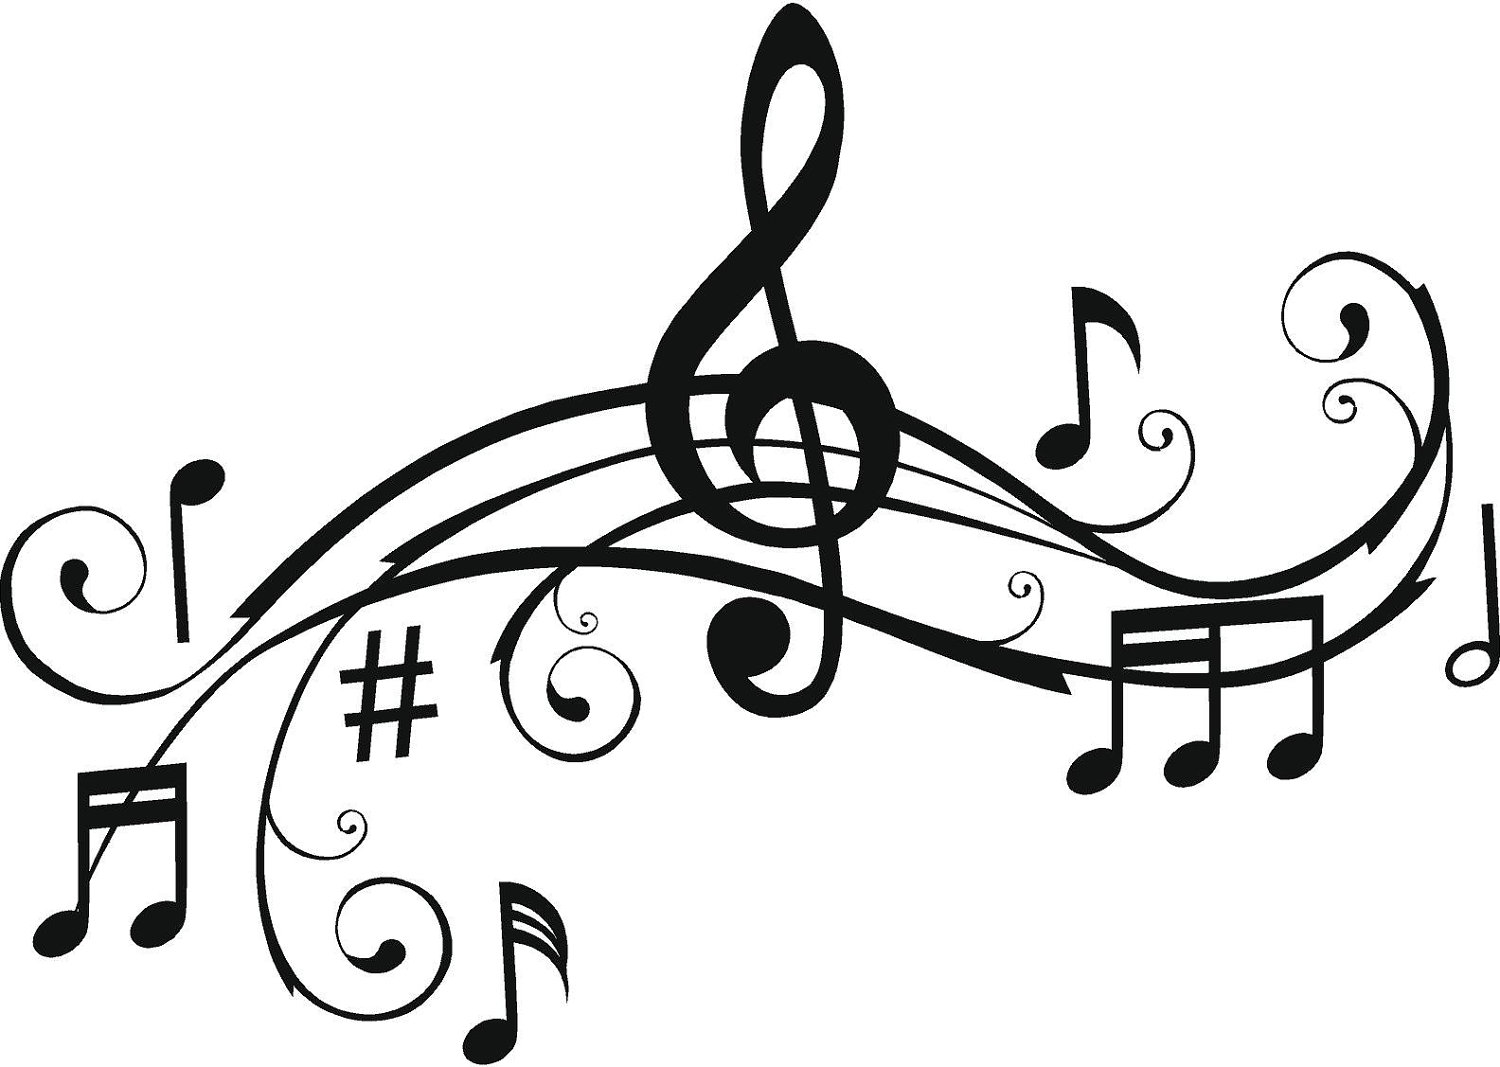 Music notes clipart black and white free